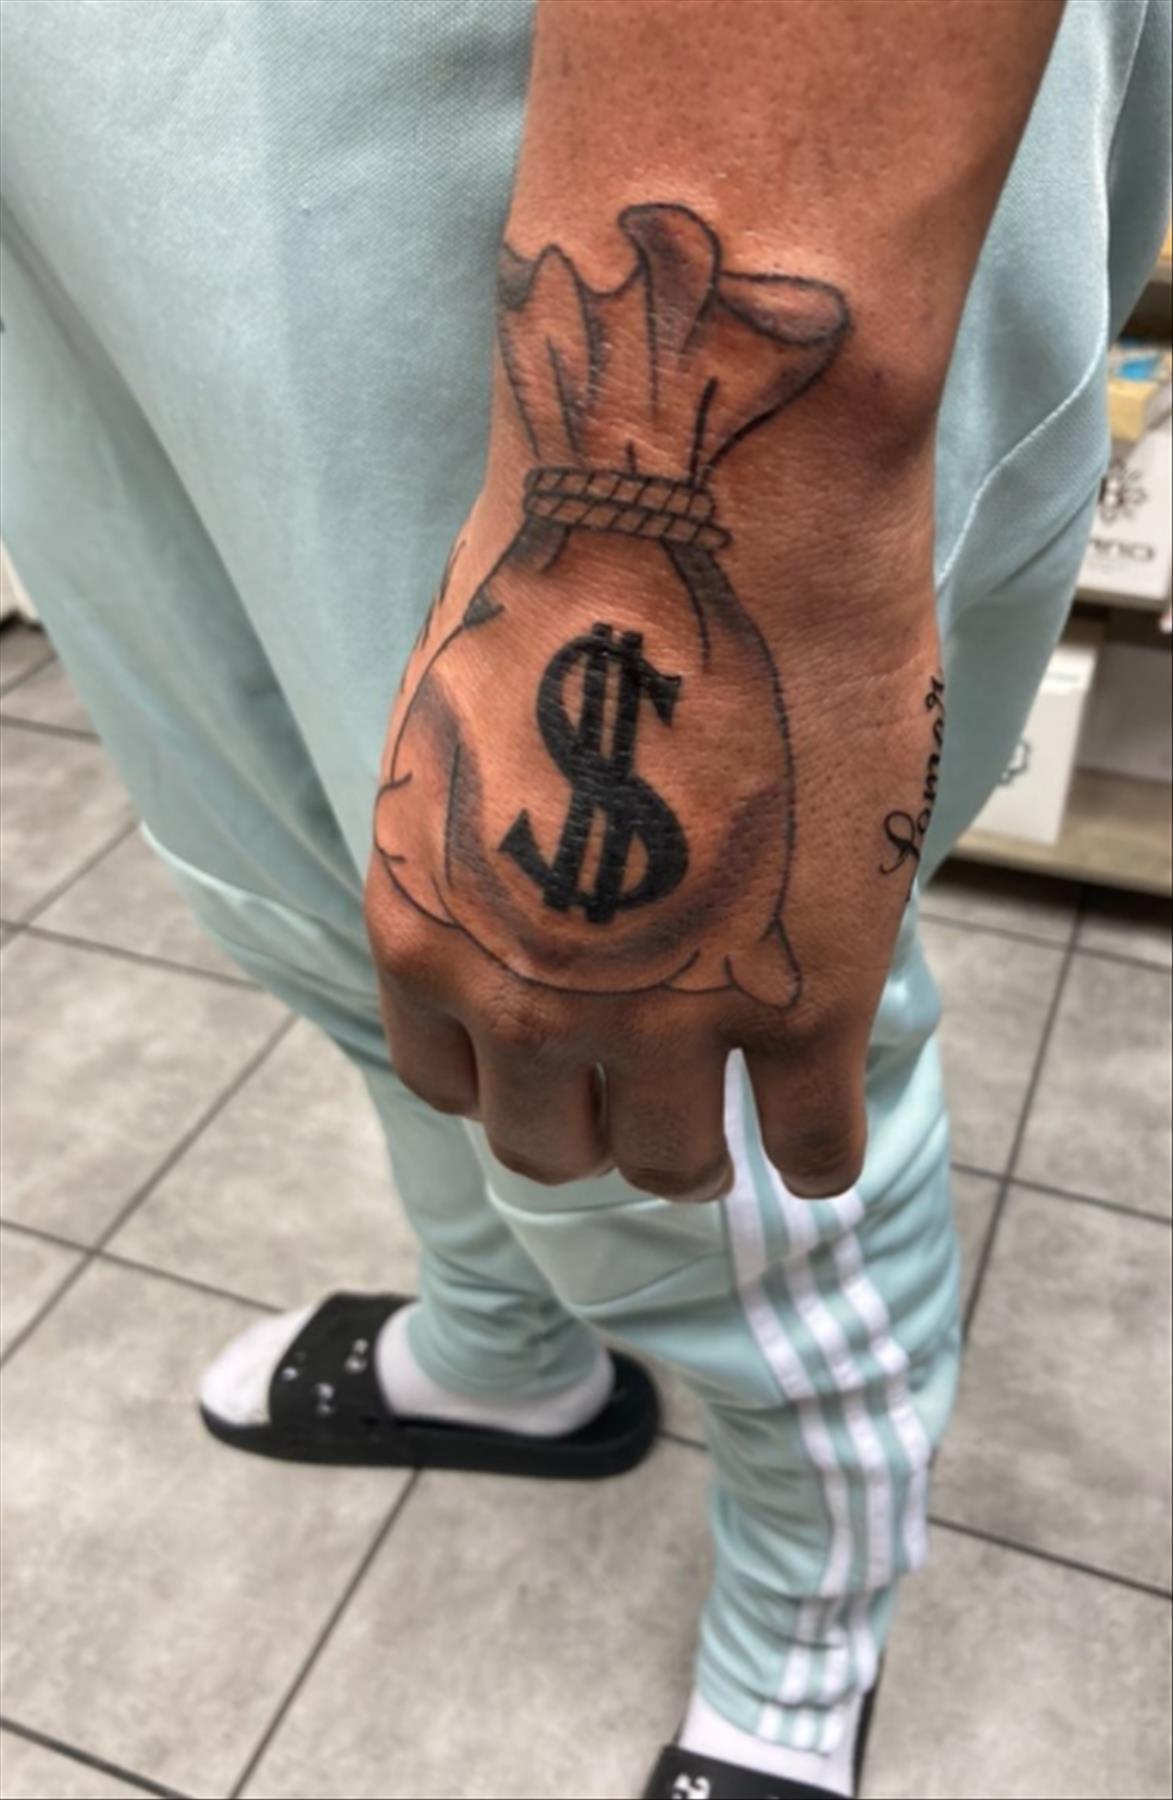 Trending Money Bag Tattoo Designs Ideas To Be Cool